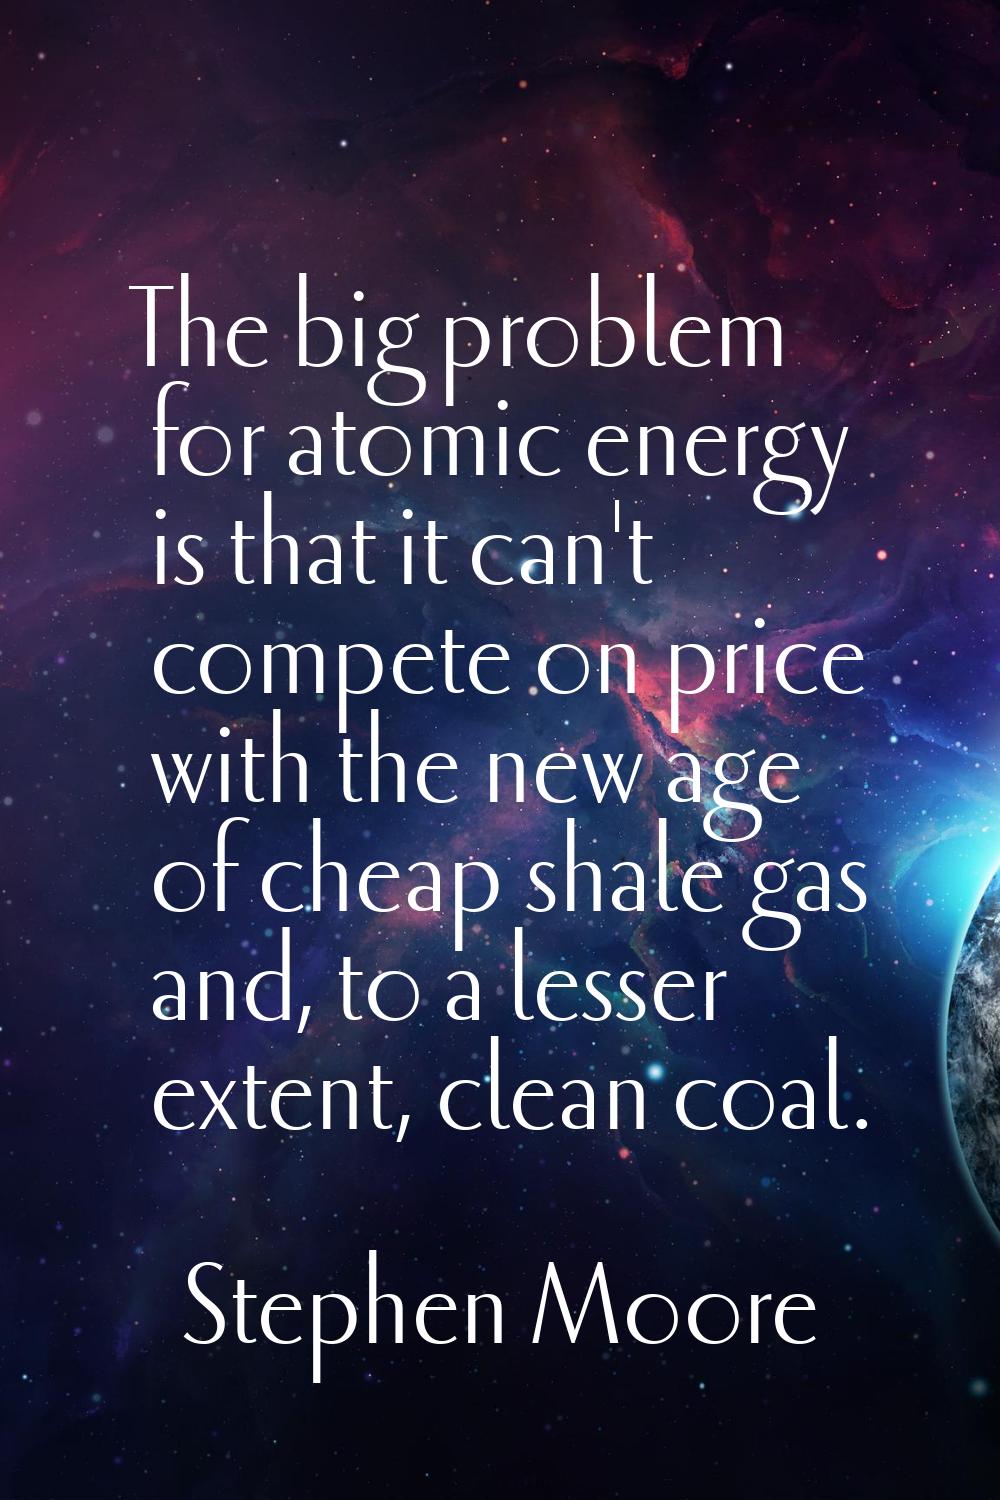 The big problem for atomic energy is that it can't compete on price with the new age of cheap shale